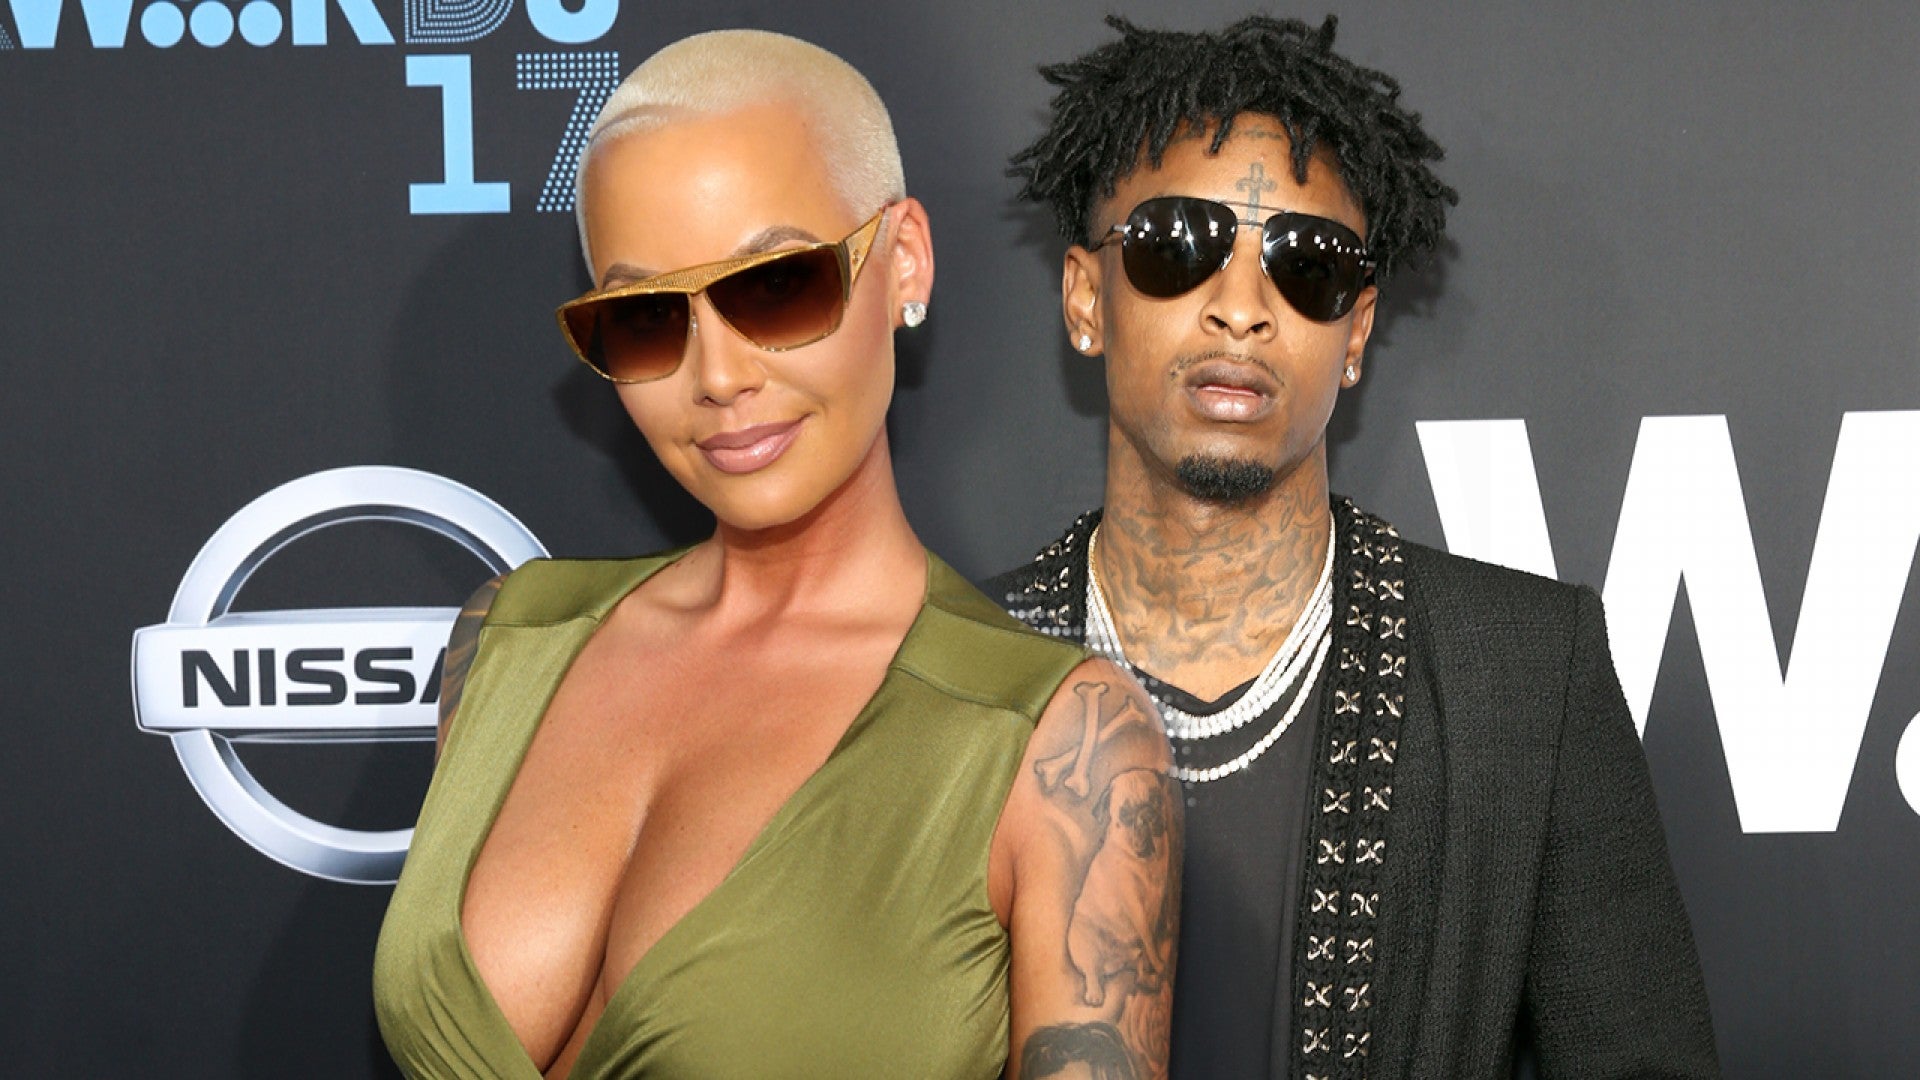 Amber Rose - Amber Rose Gushes Over New Boyfriend 21 Savage: He 'Genuinely Has My Back'  | Entertainment Tonight